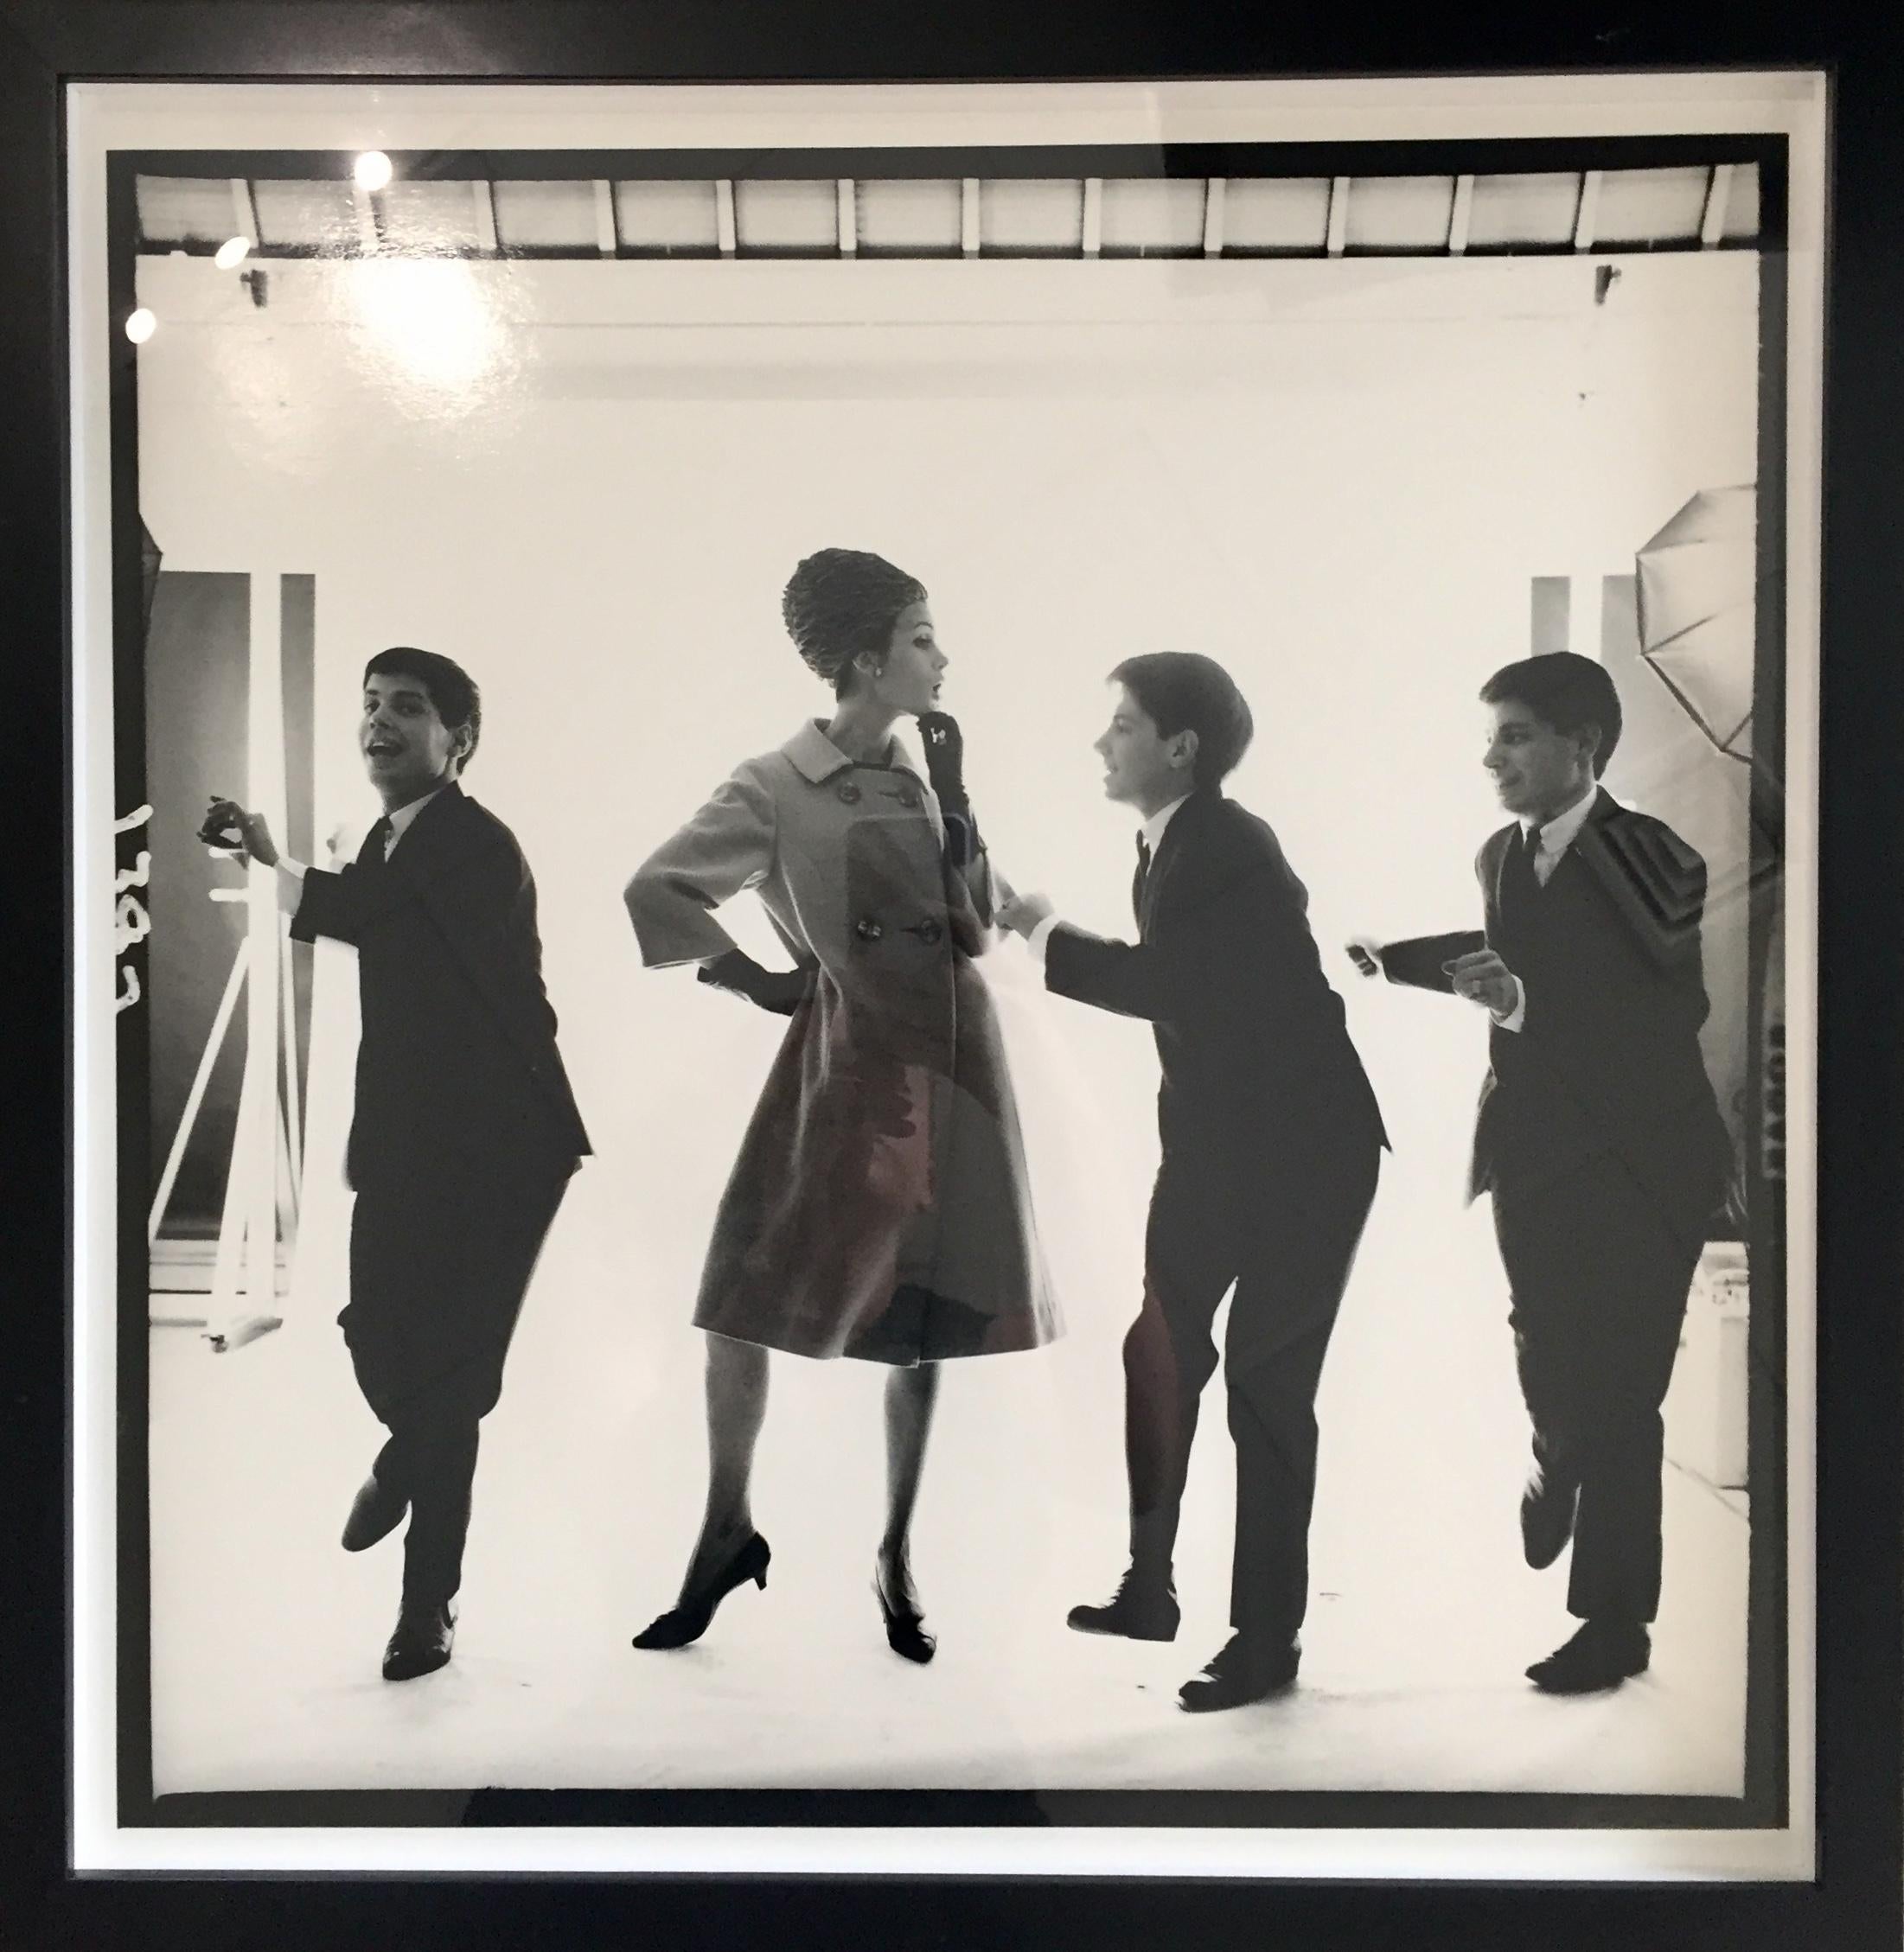 Bert Stern Abstract Photograph - Triplets Edward, Dennis, Michael Magid Dancing with Model In Jersey Coat, 1963